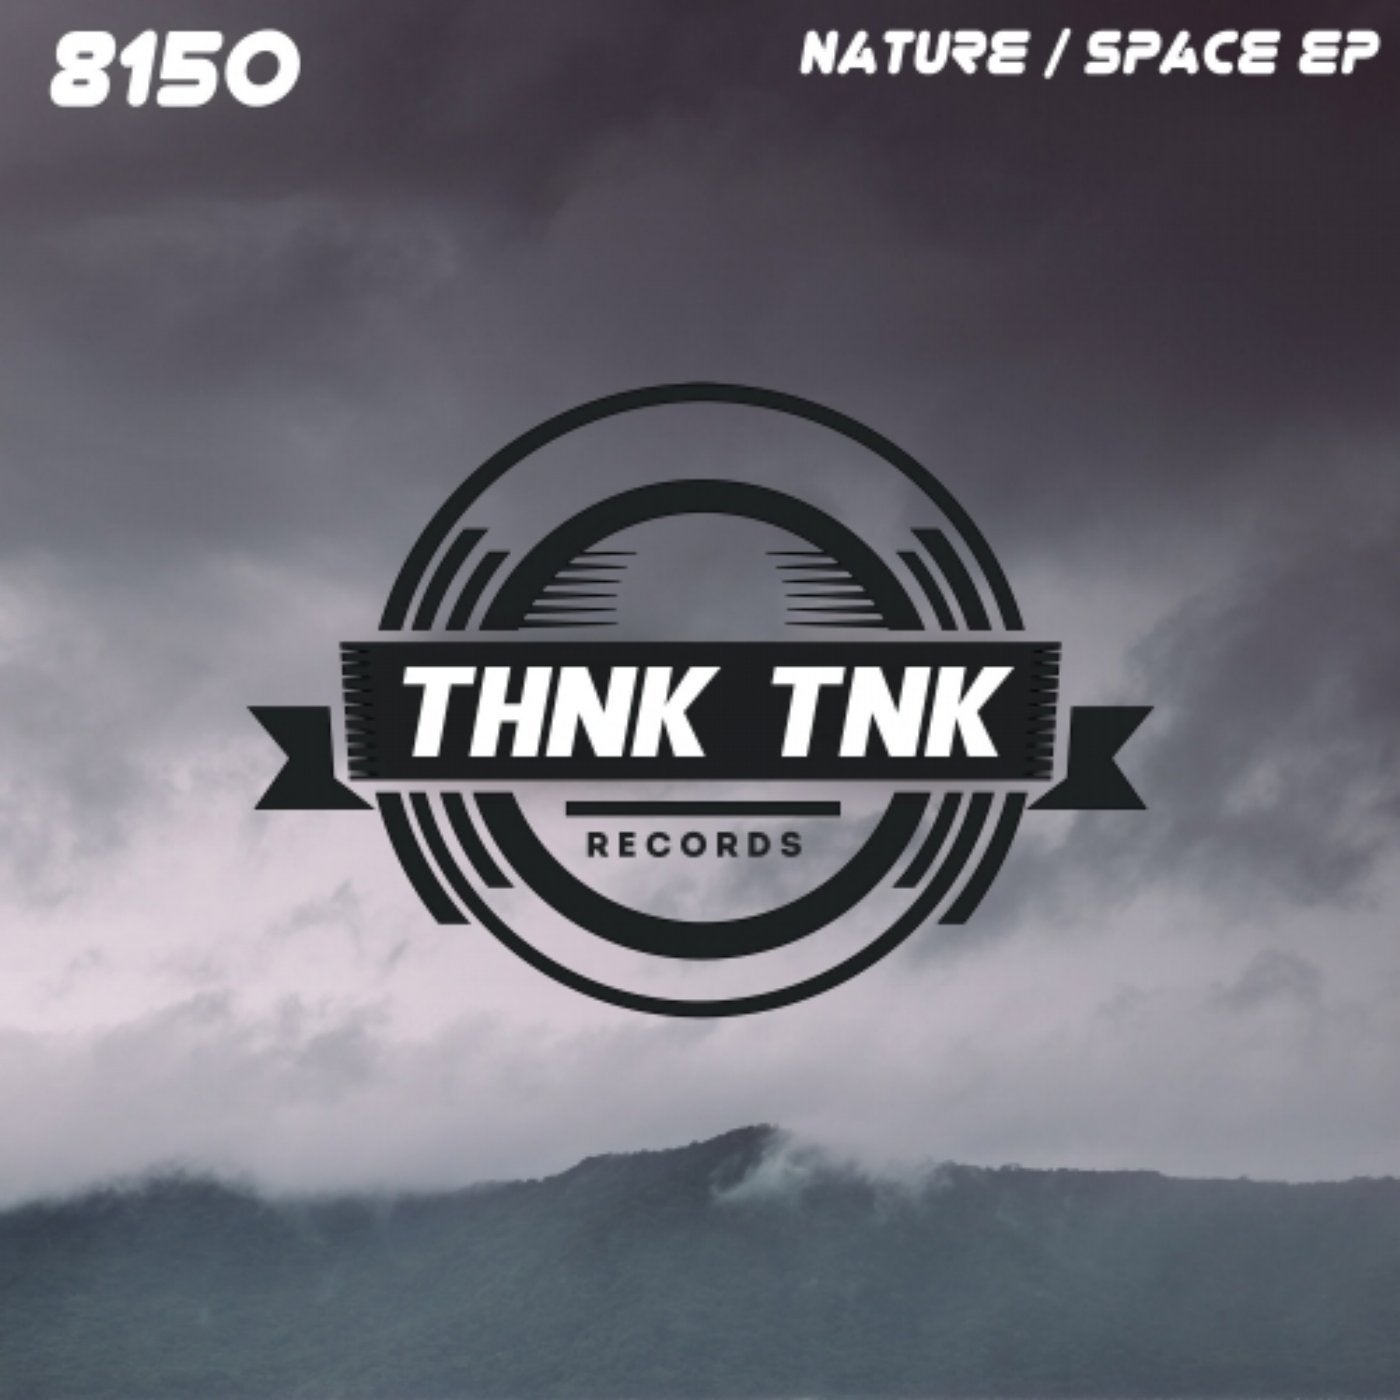 Nature/Space EP